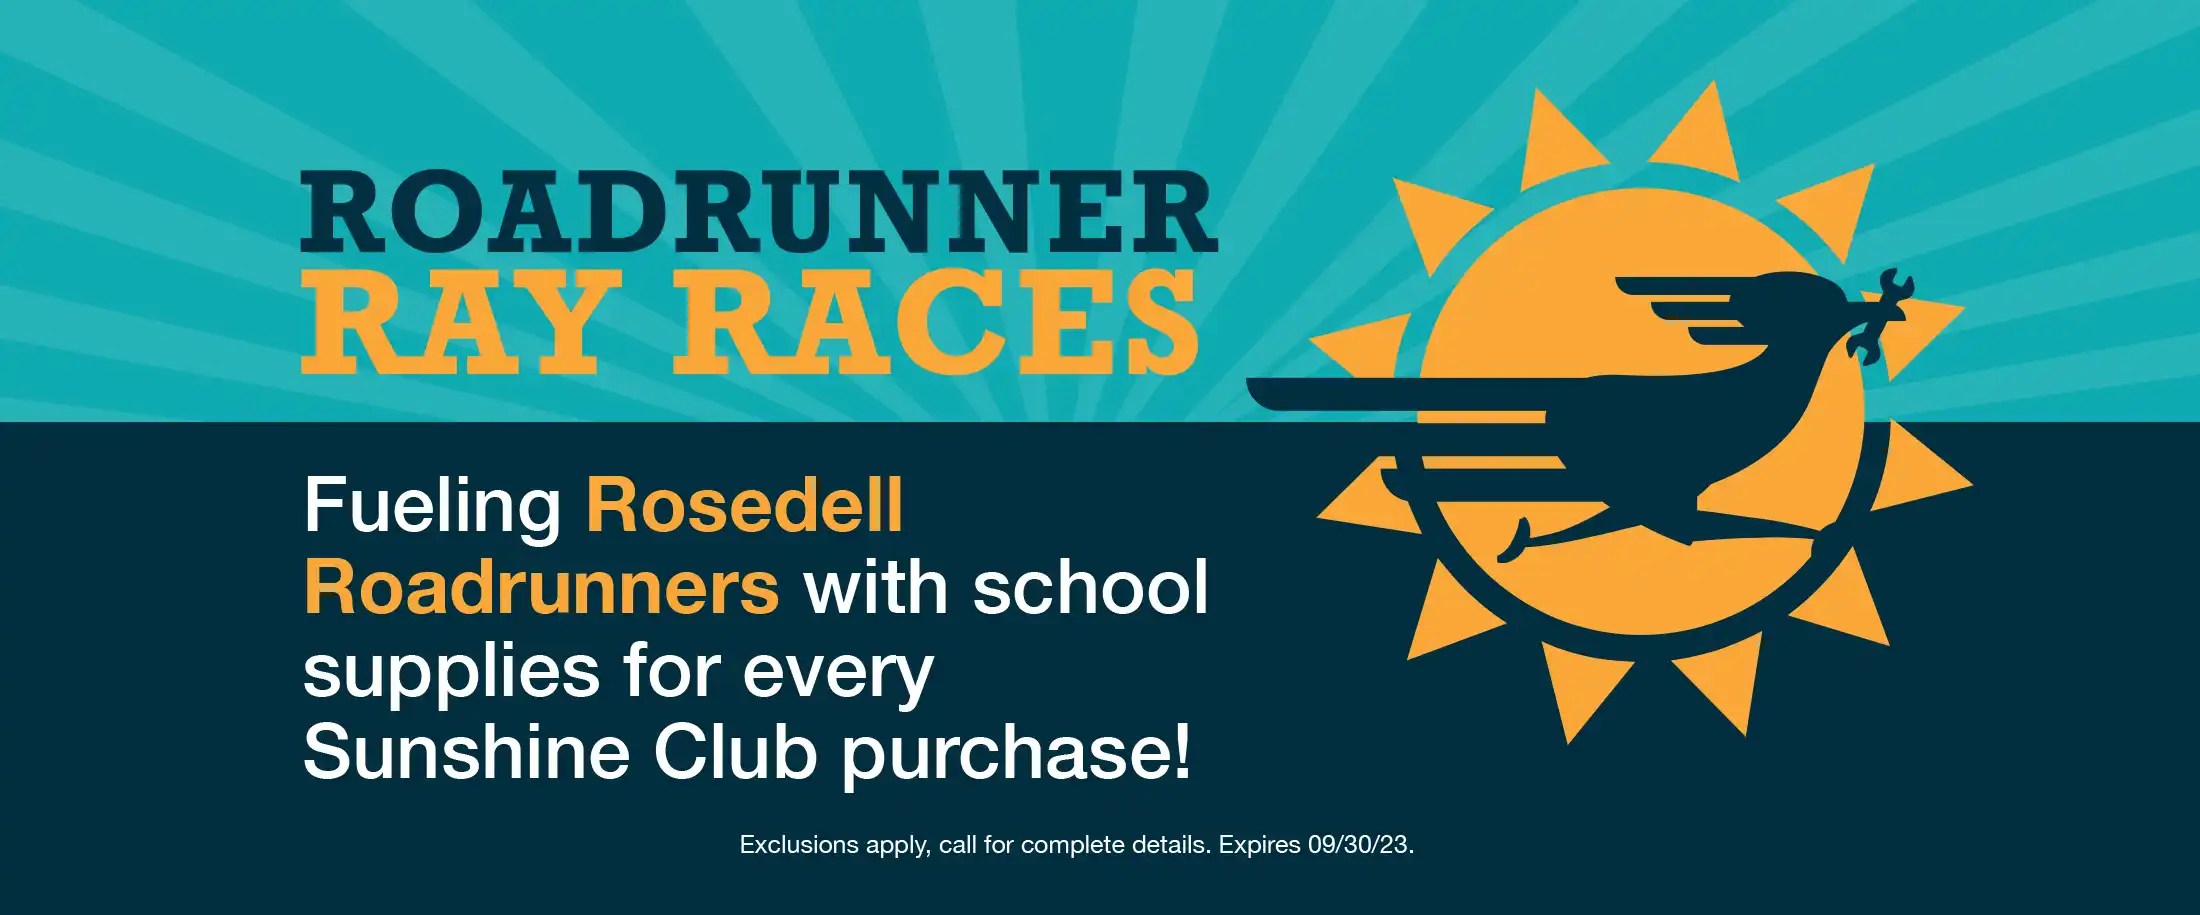 Maintenance Club members can help donate to the RoadRunner Ray Races.